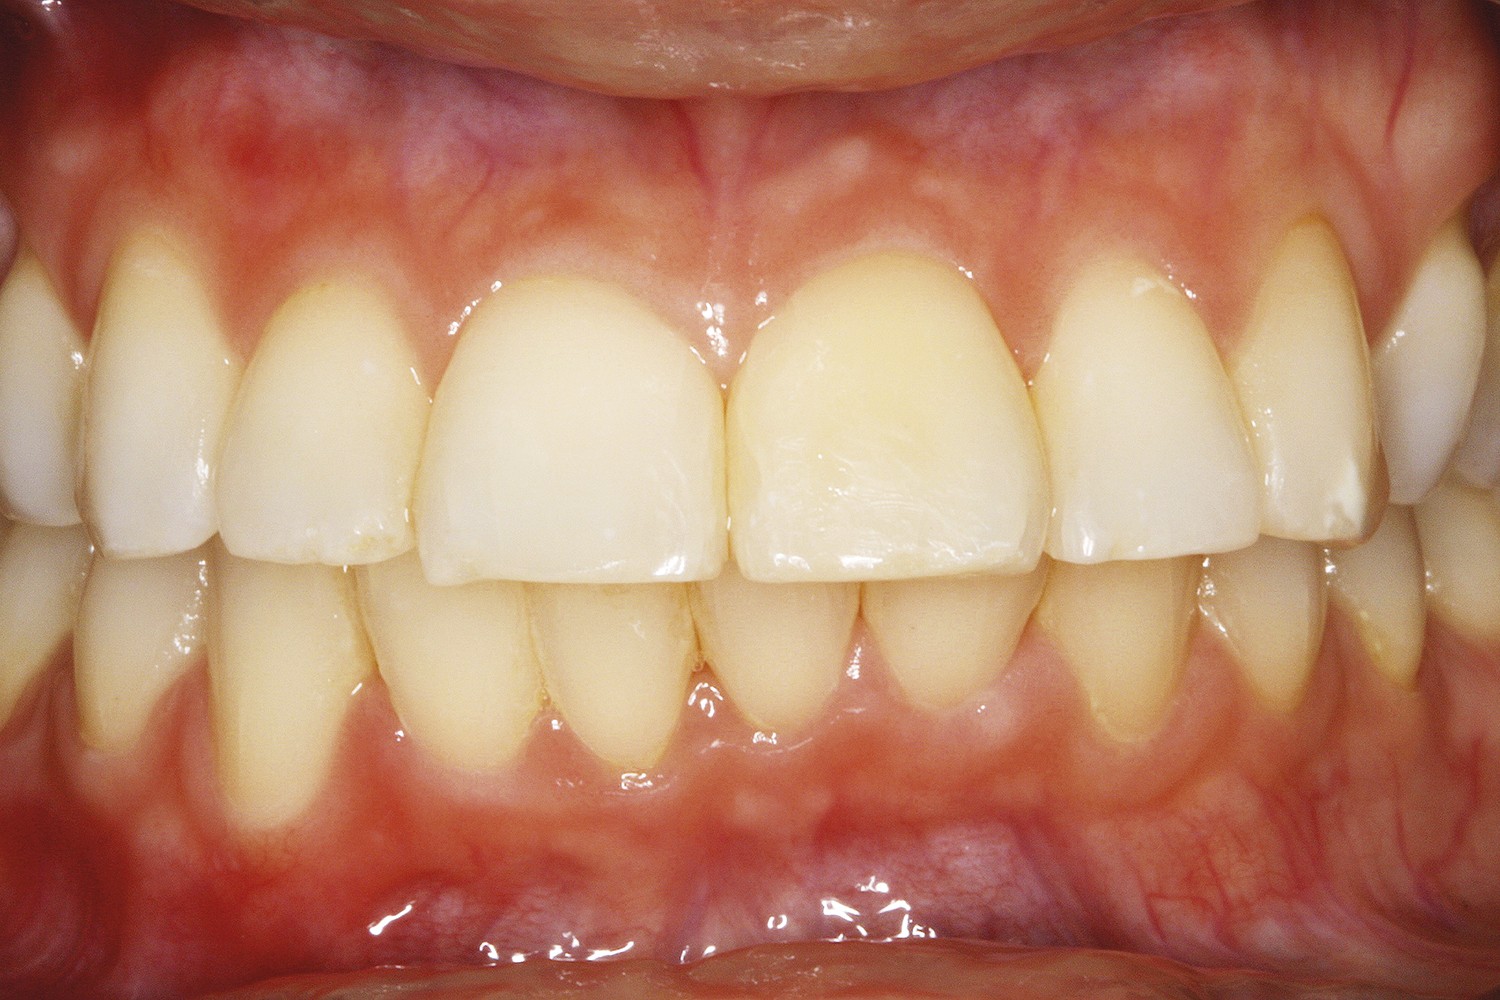 Alternative whitening in isolated tooth with dystrophic pulp calcification